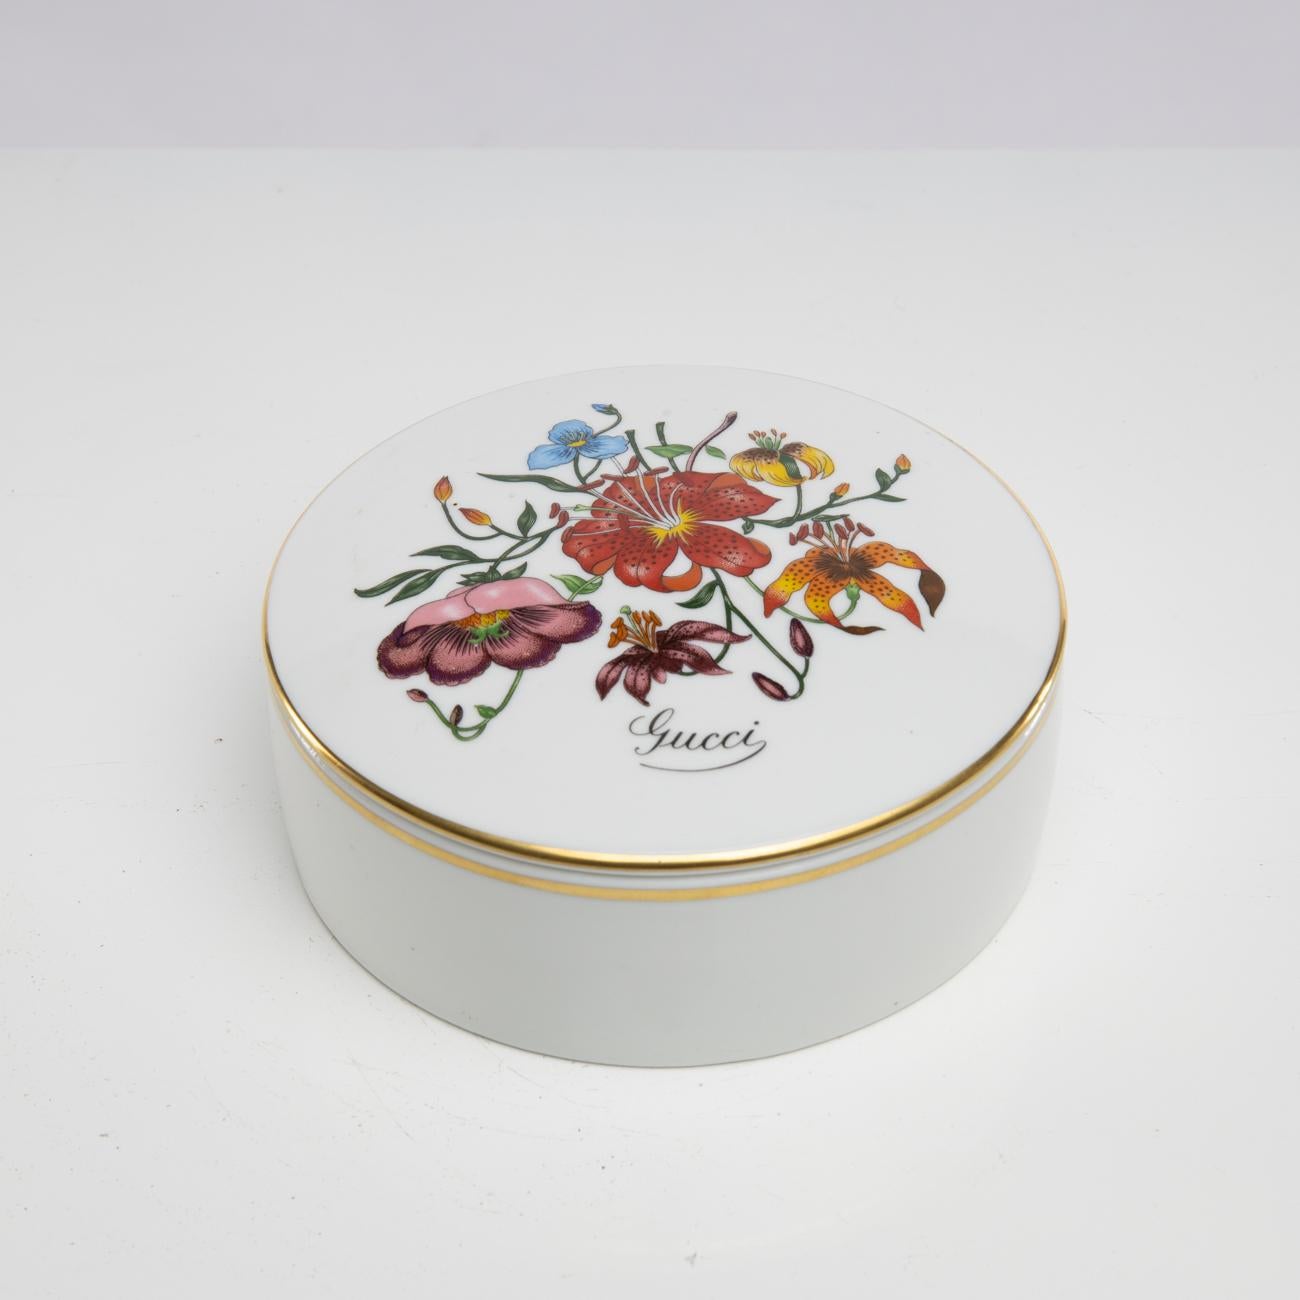 Porcelain lided box decorated with the iconic Flora motif :
Pretty porcelain box whose lid is decorated with the morif 